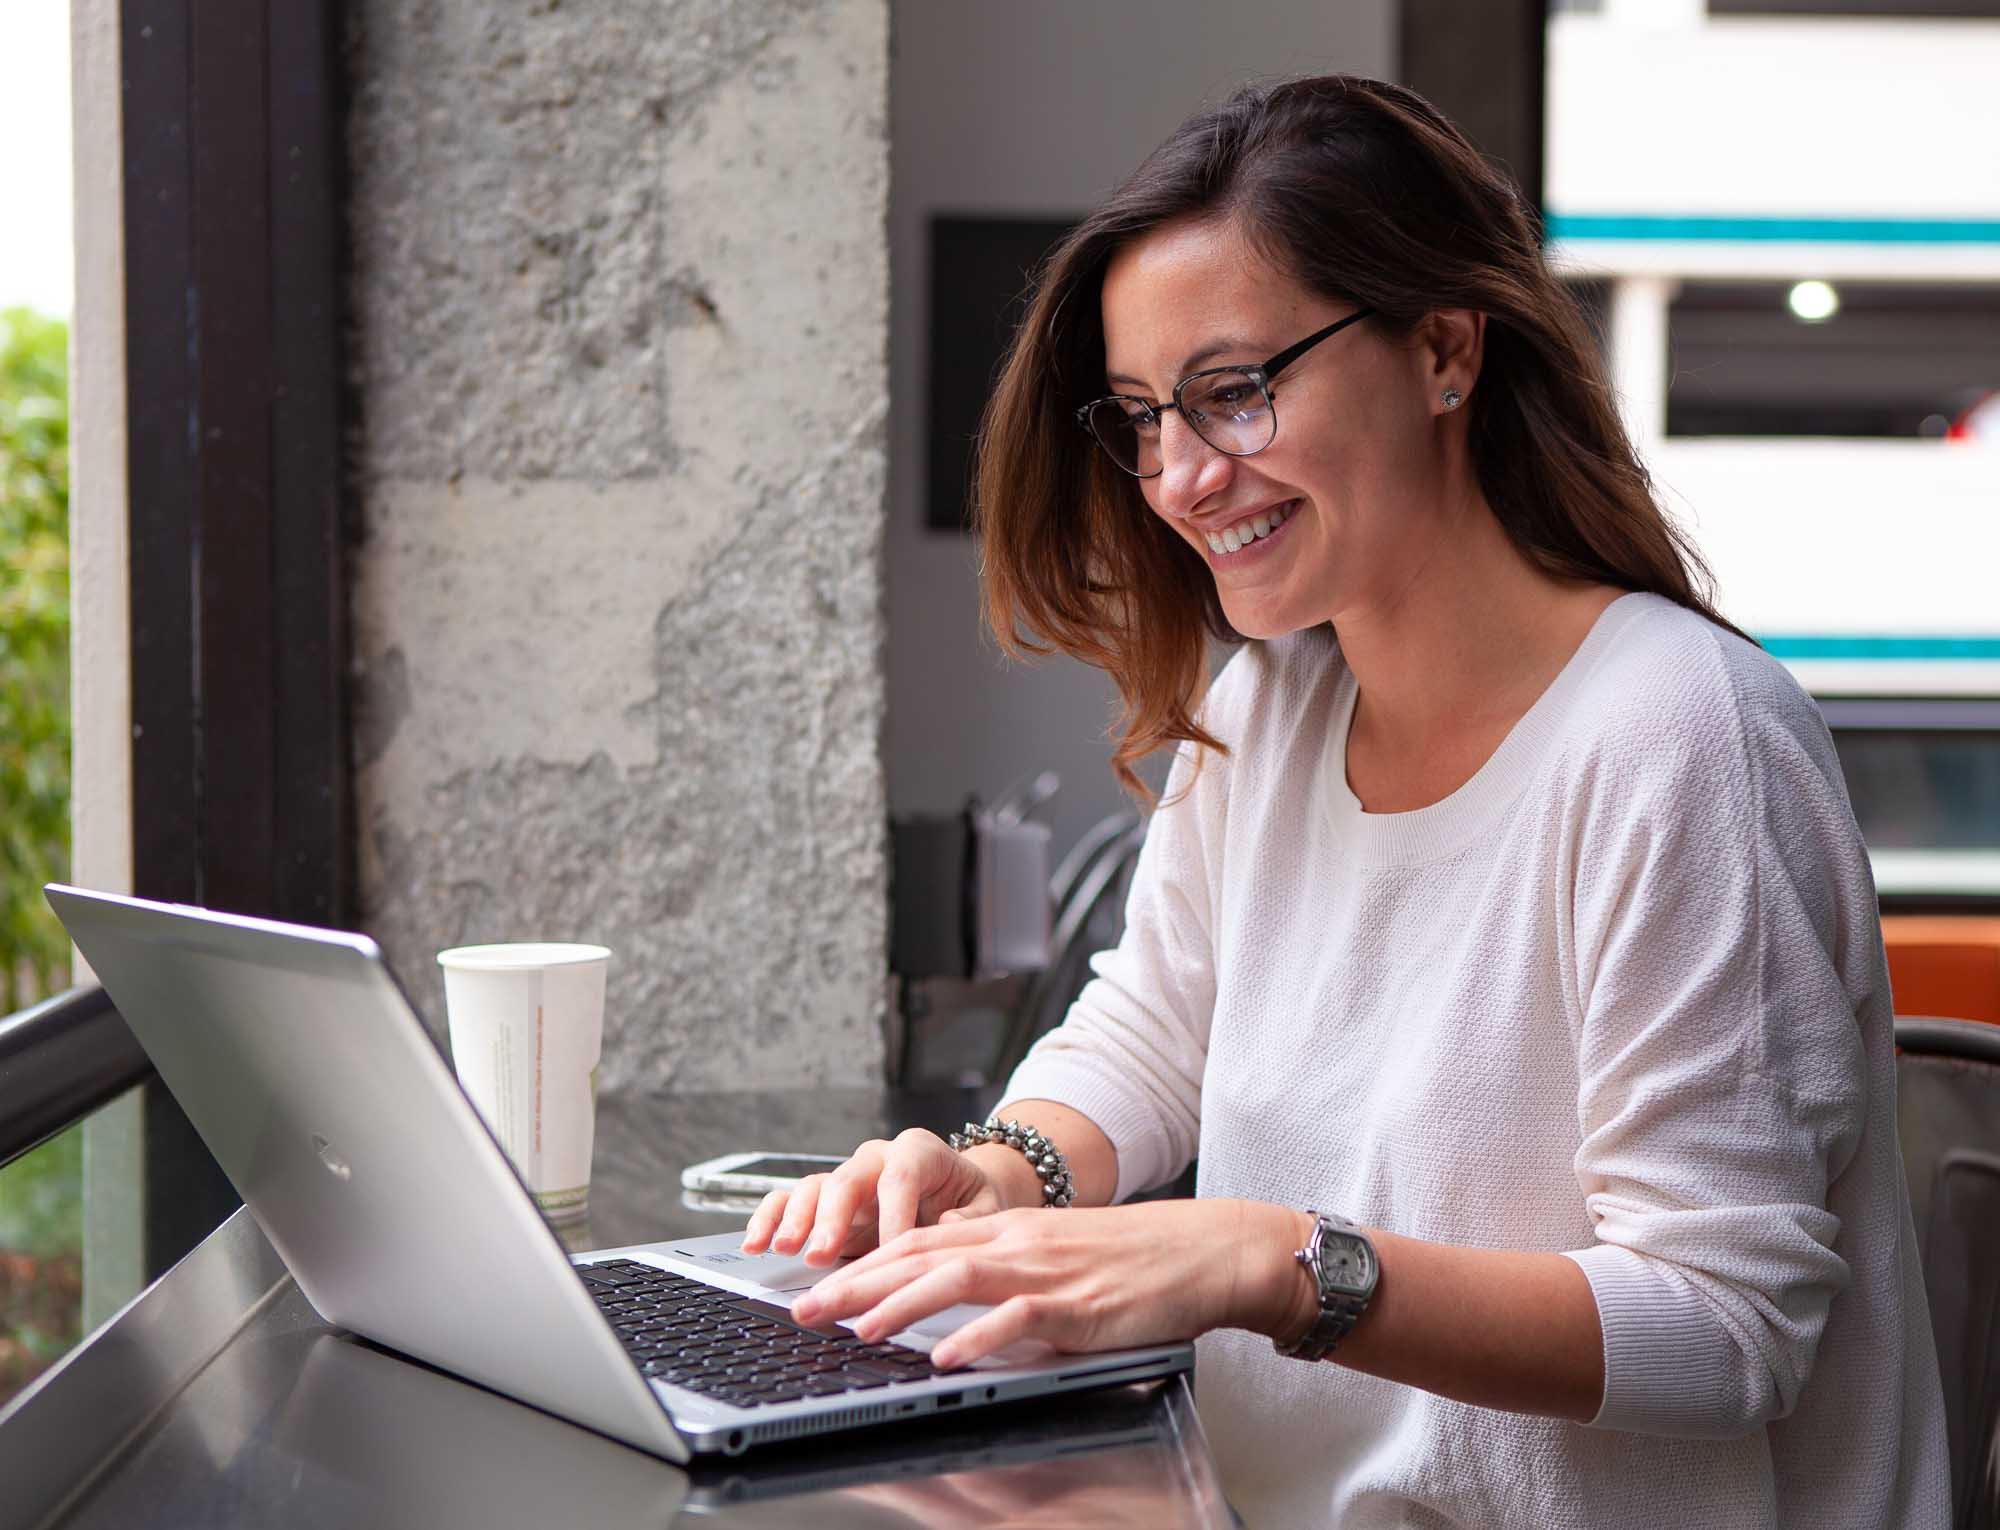 Woman smiling while working on her computer at her place of business